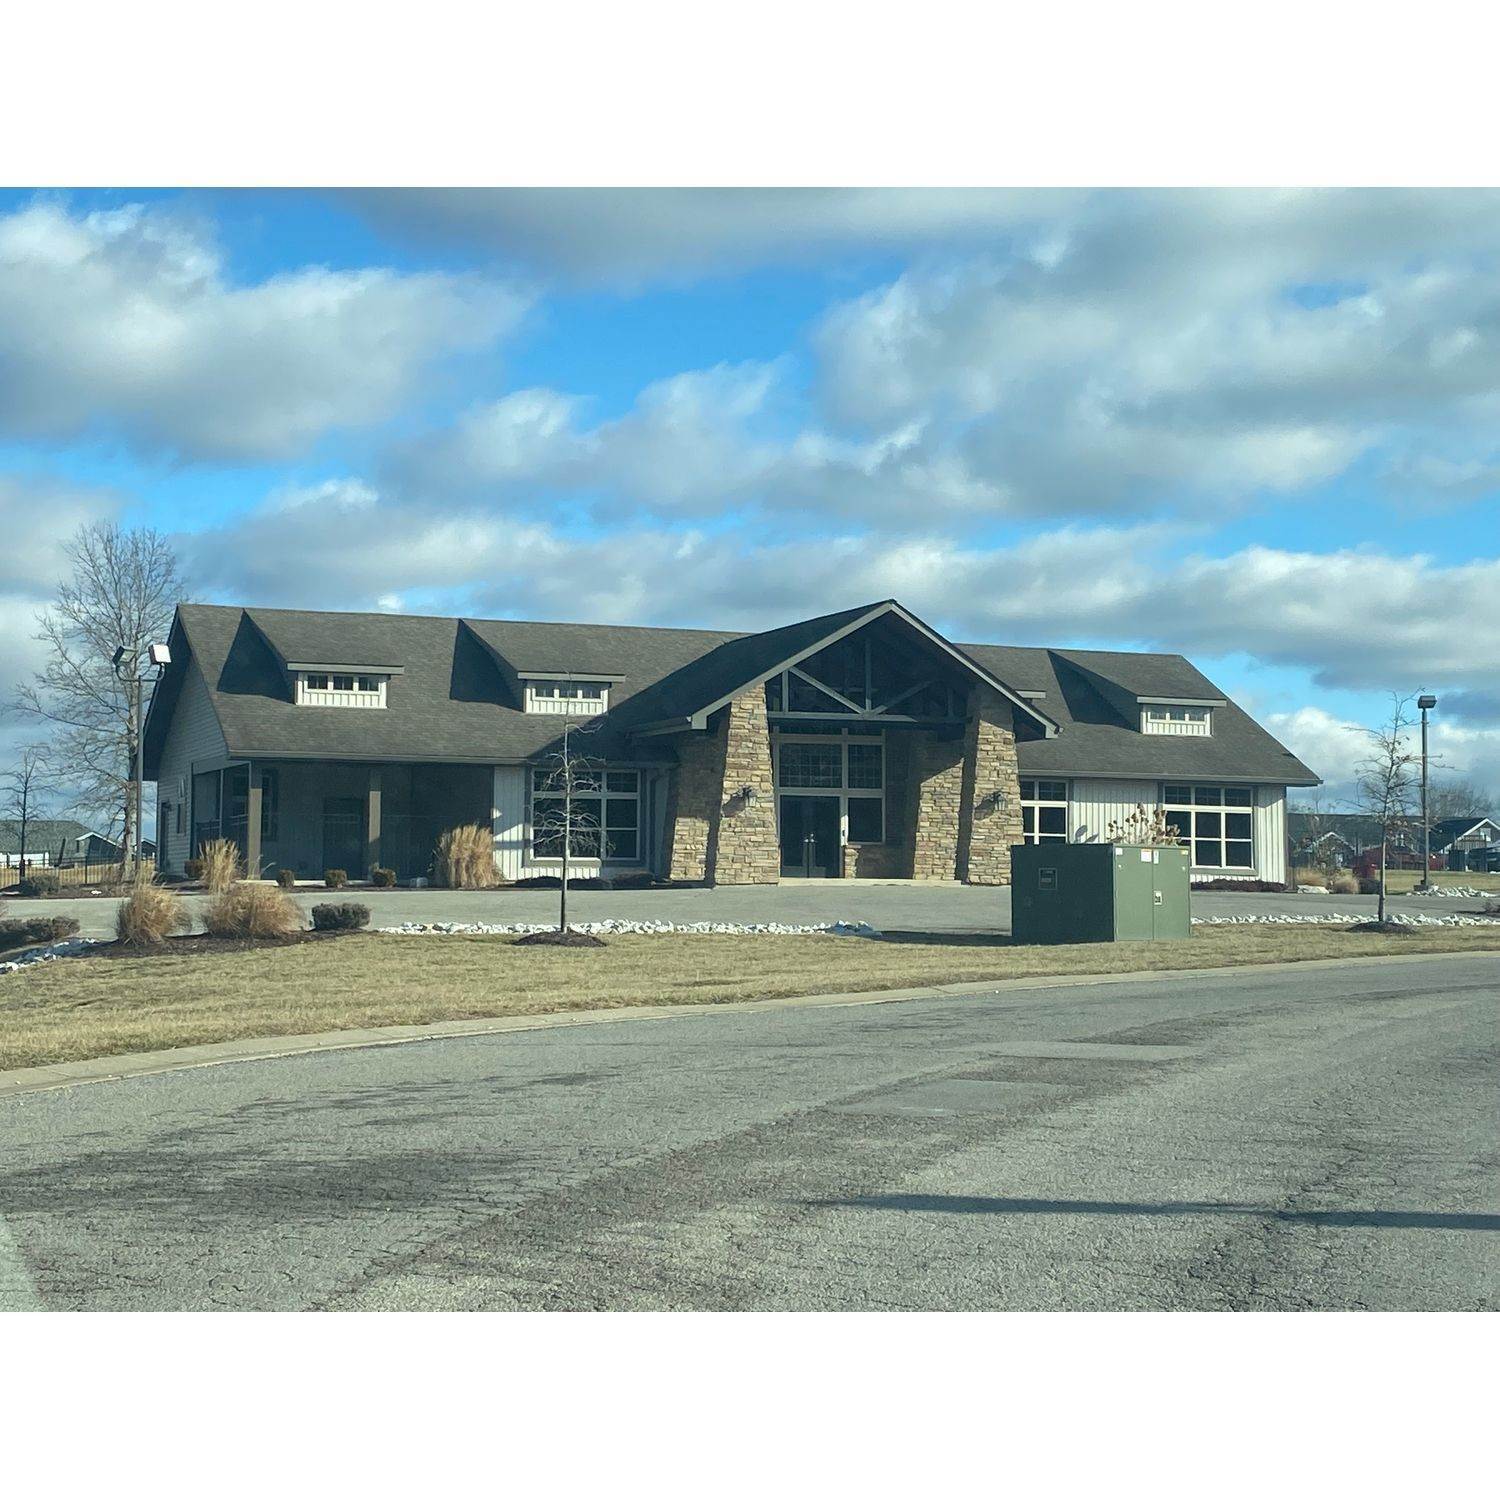 46. Majestic Lakes κτίριο σε 3 Hammerstone Ct, Moscow Mills, MO 63362